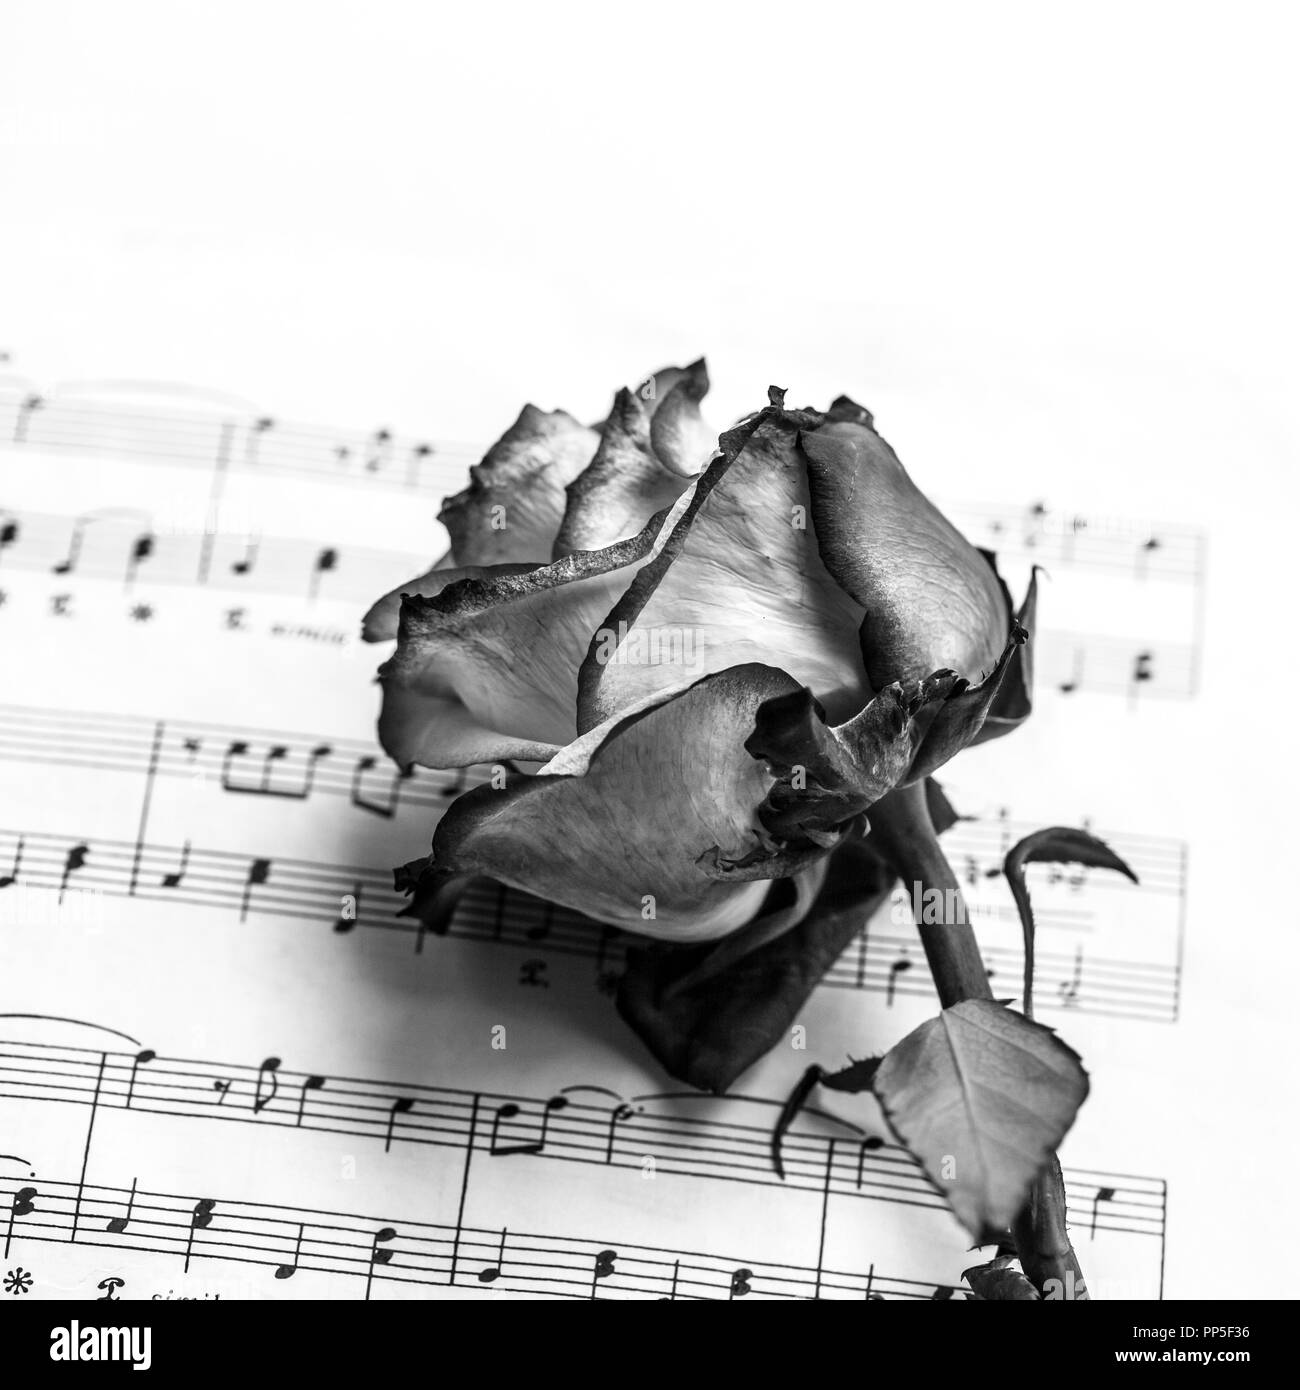 Dead rose Black and White Stock Photos & Images - Alamy